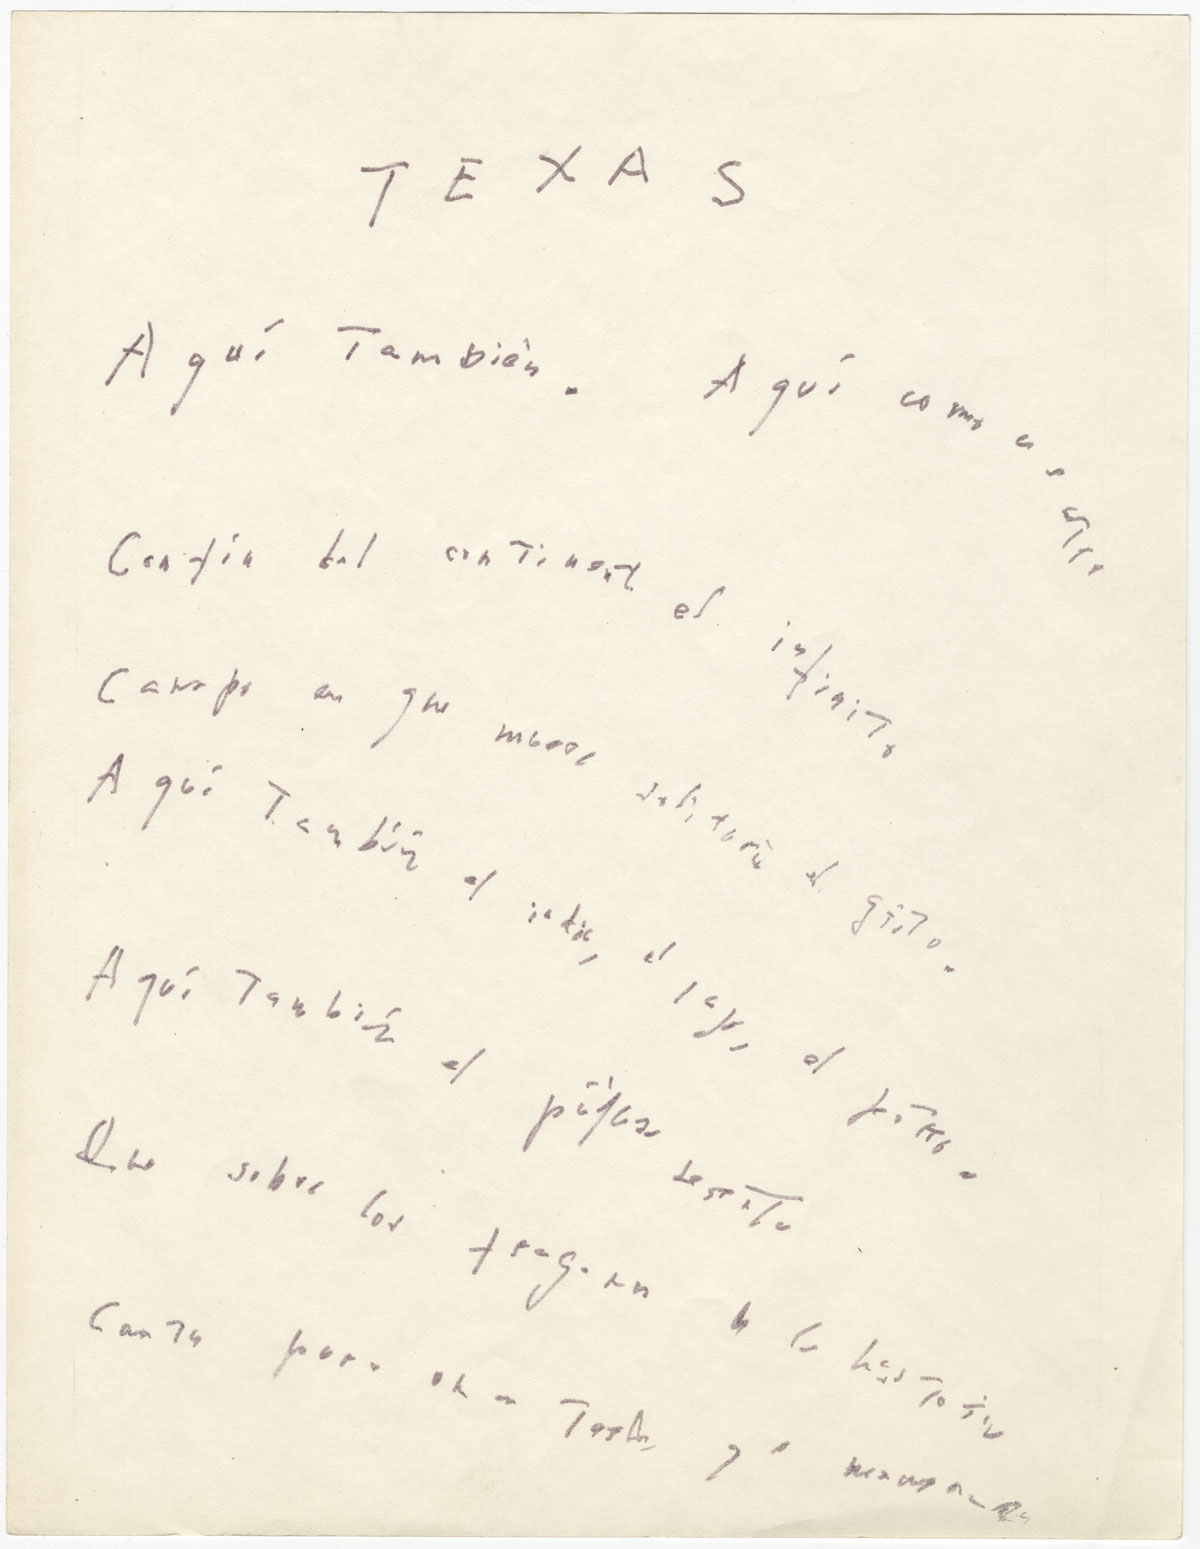 Jorge Luis Borges,”Texas” (page 1). From the manuscripts collection at the Harry Ransom Center. / Jorge Luis Borges, "Texas" (página 1). De la colección de manuscritos en el Harry Ransom Center.